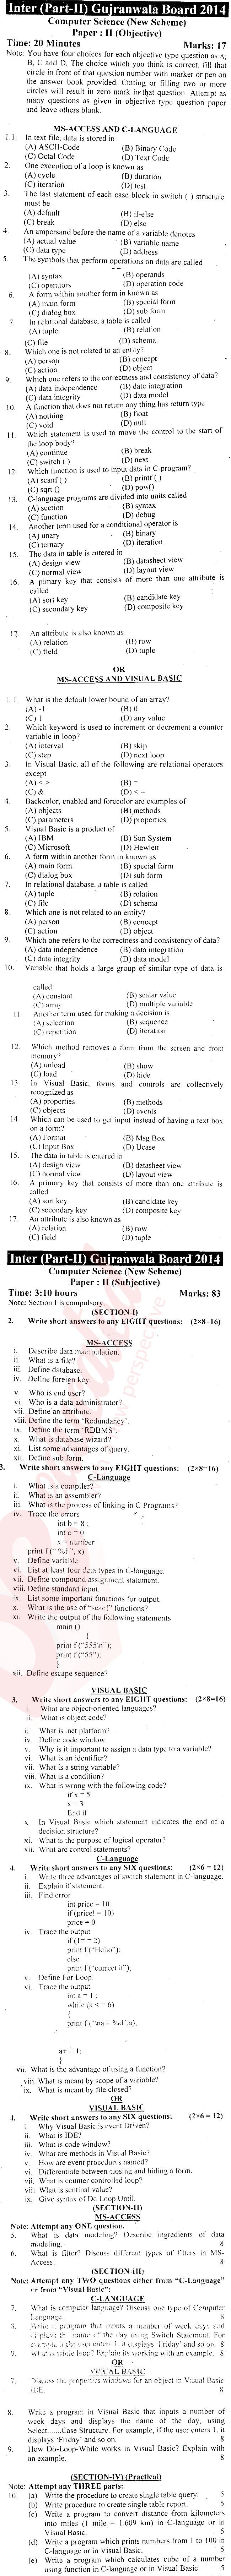 Computer Science ICS Part 2 Past Paper Group 1 BISE Gujranwala 2014